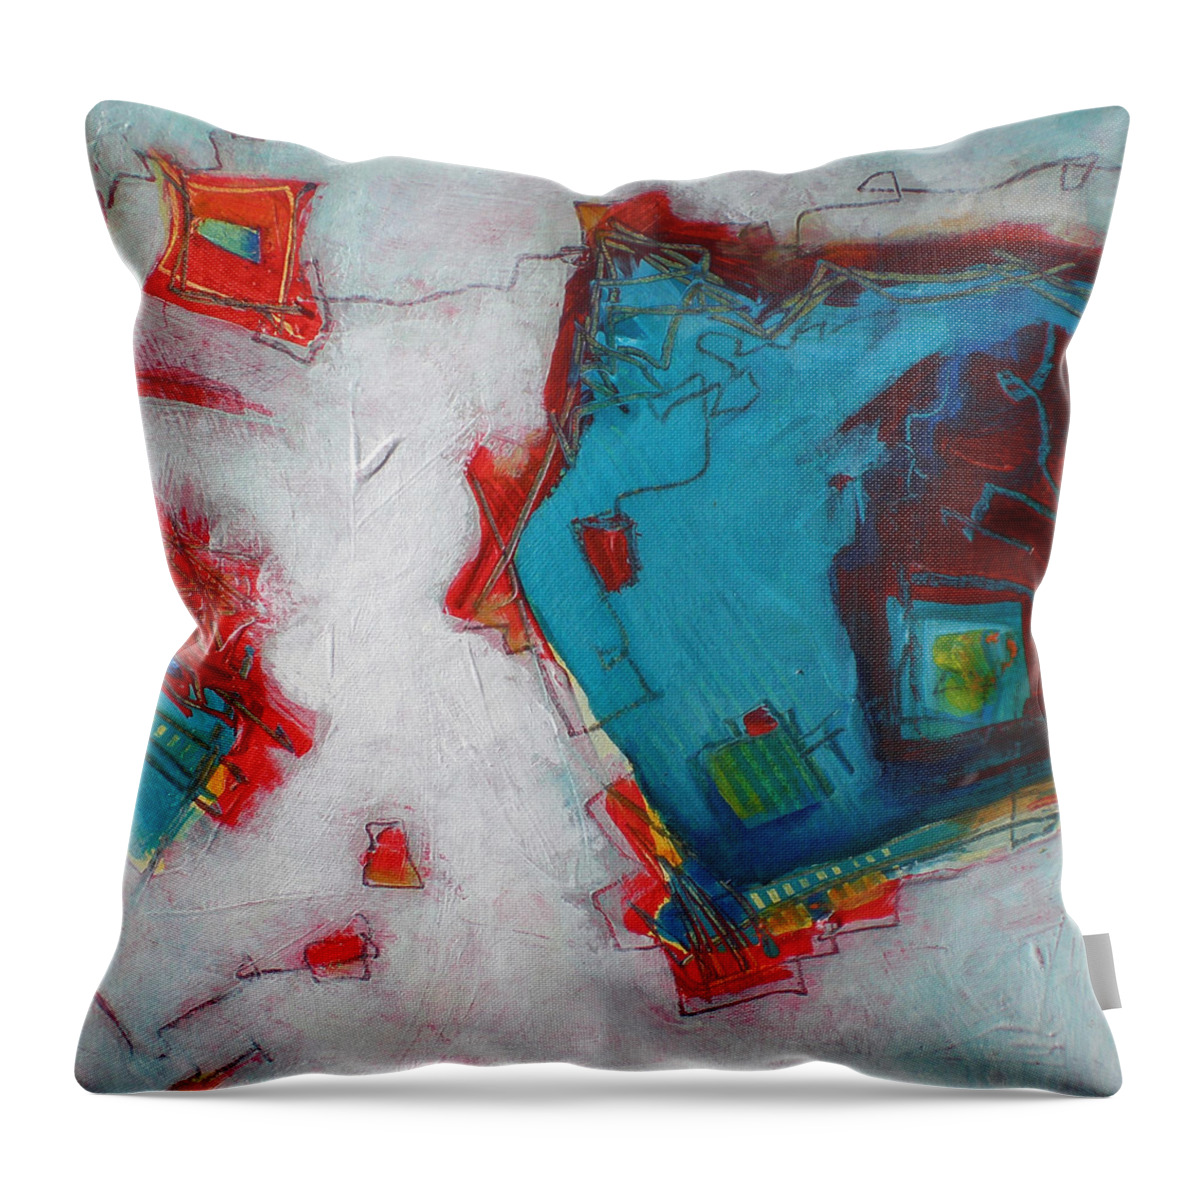 Abstract Throw Pillow featuring the painting Connections by Susanne Clark